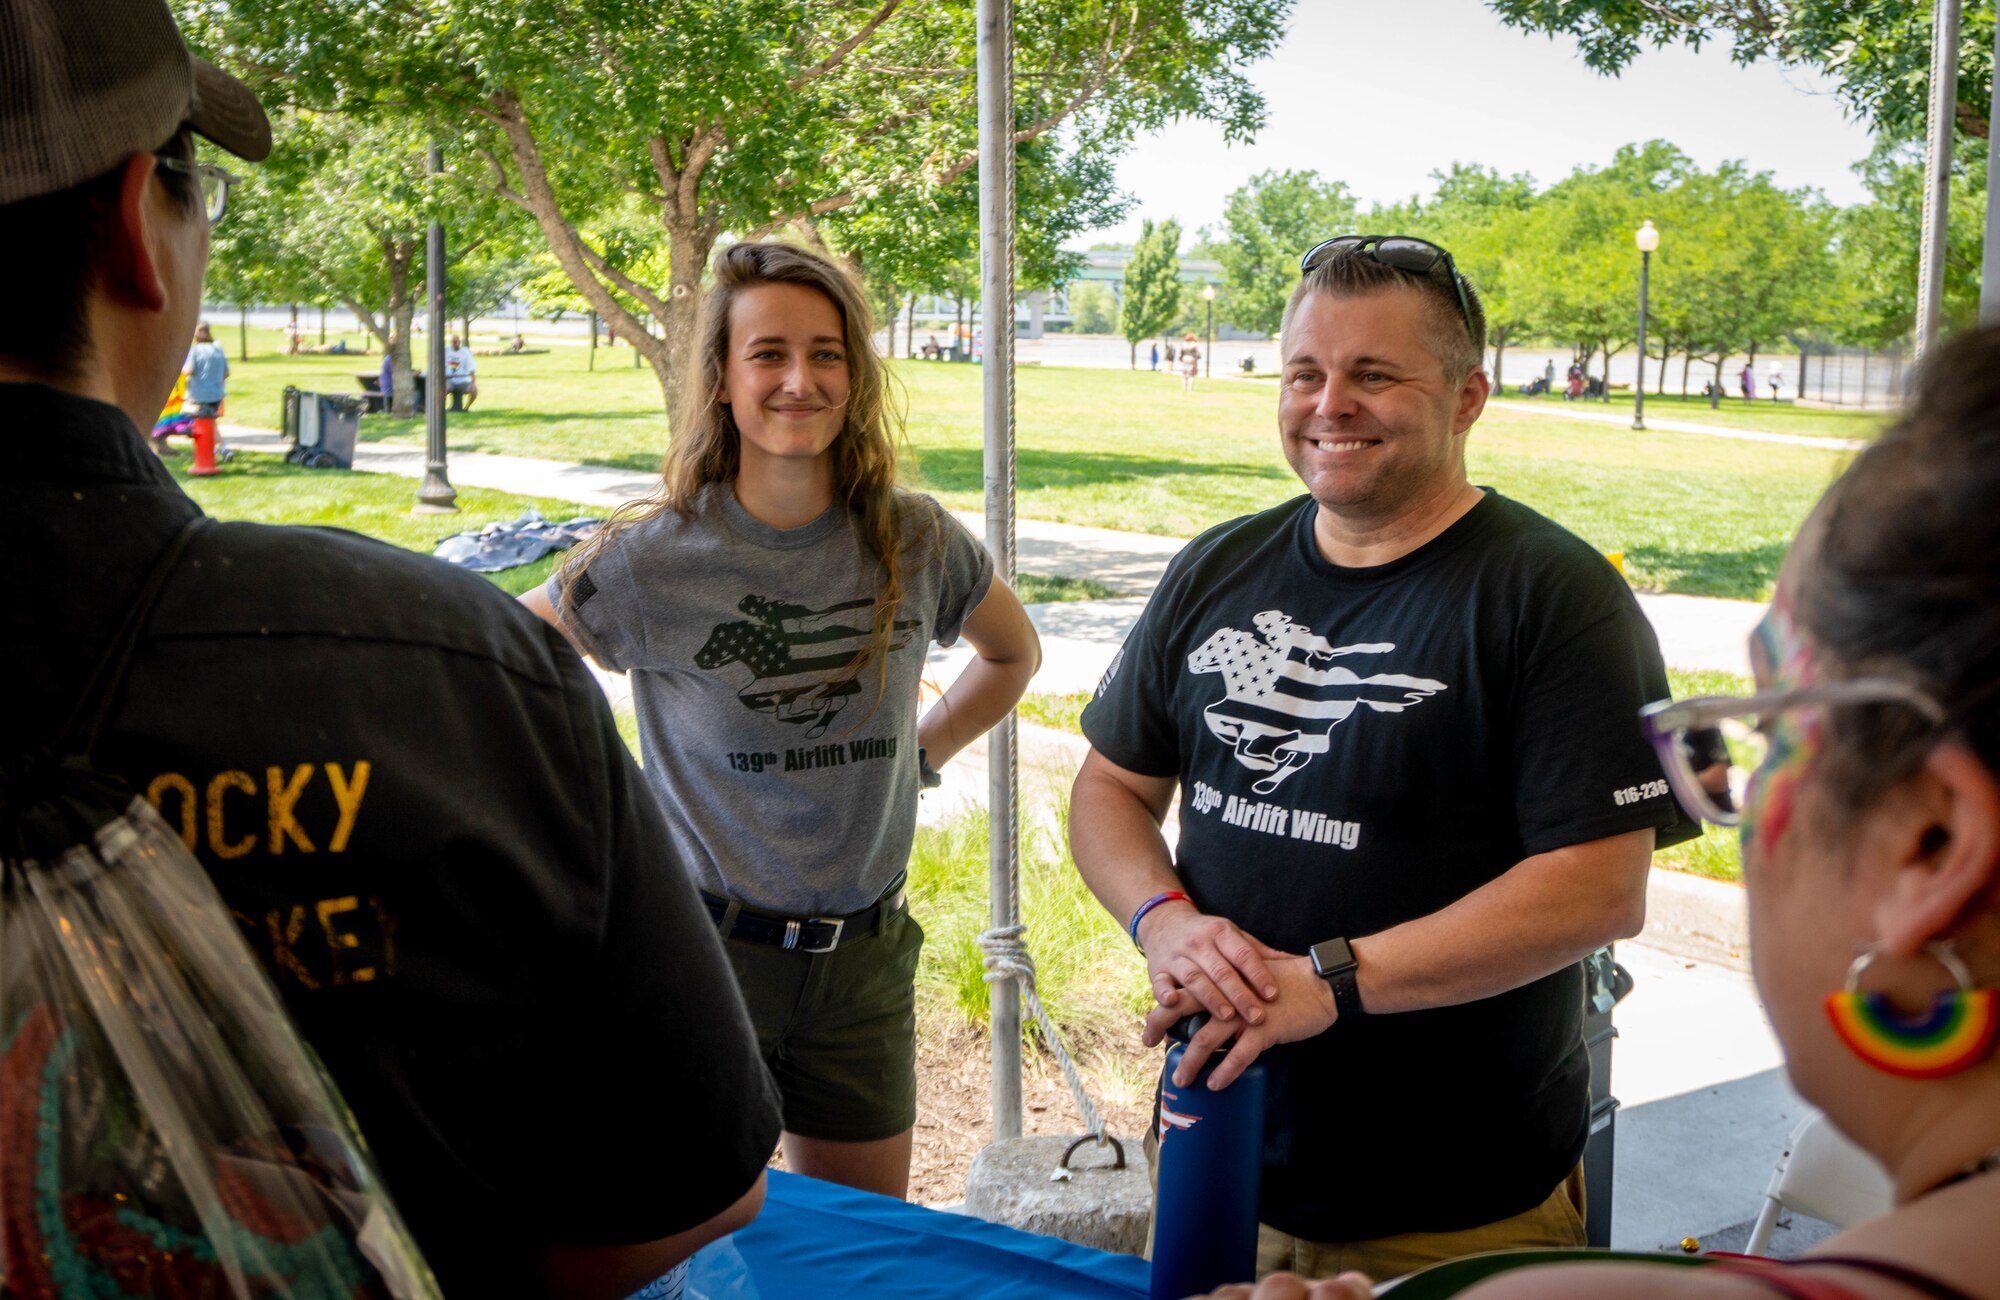 Recruiter talks with festival attendees